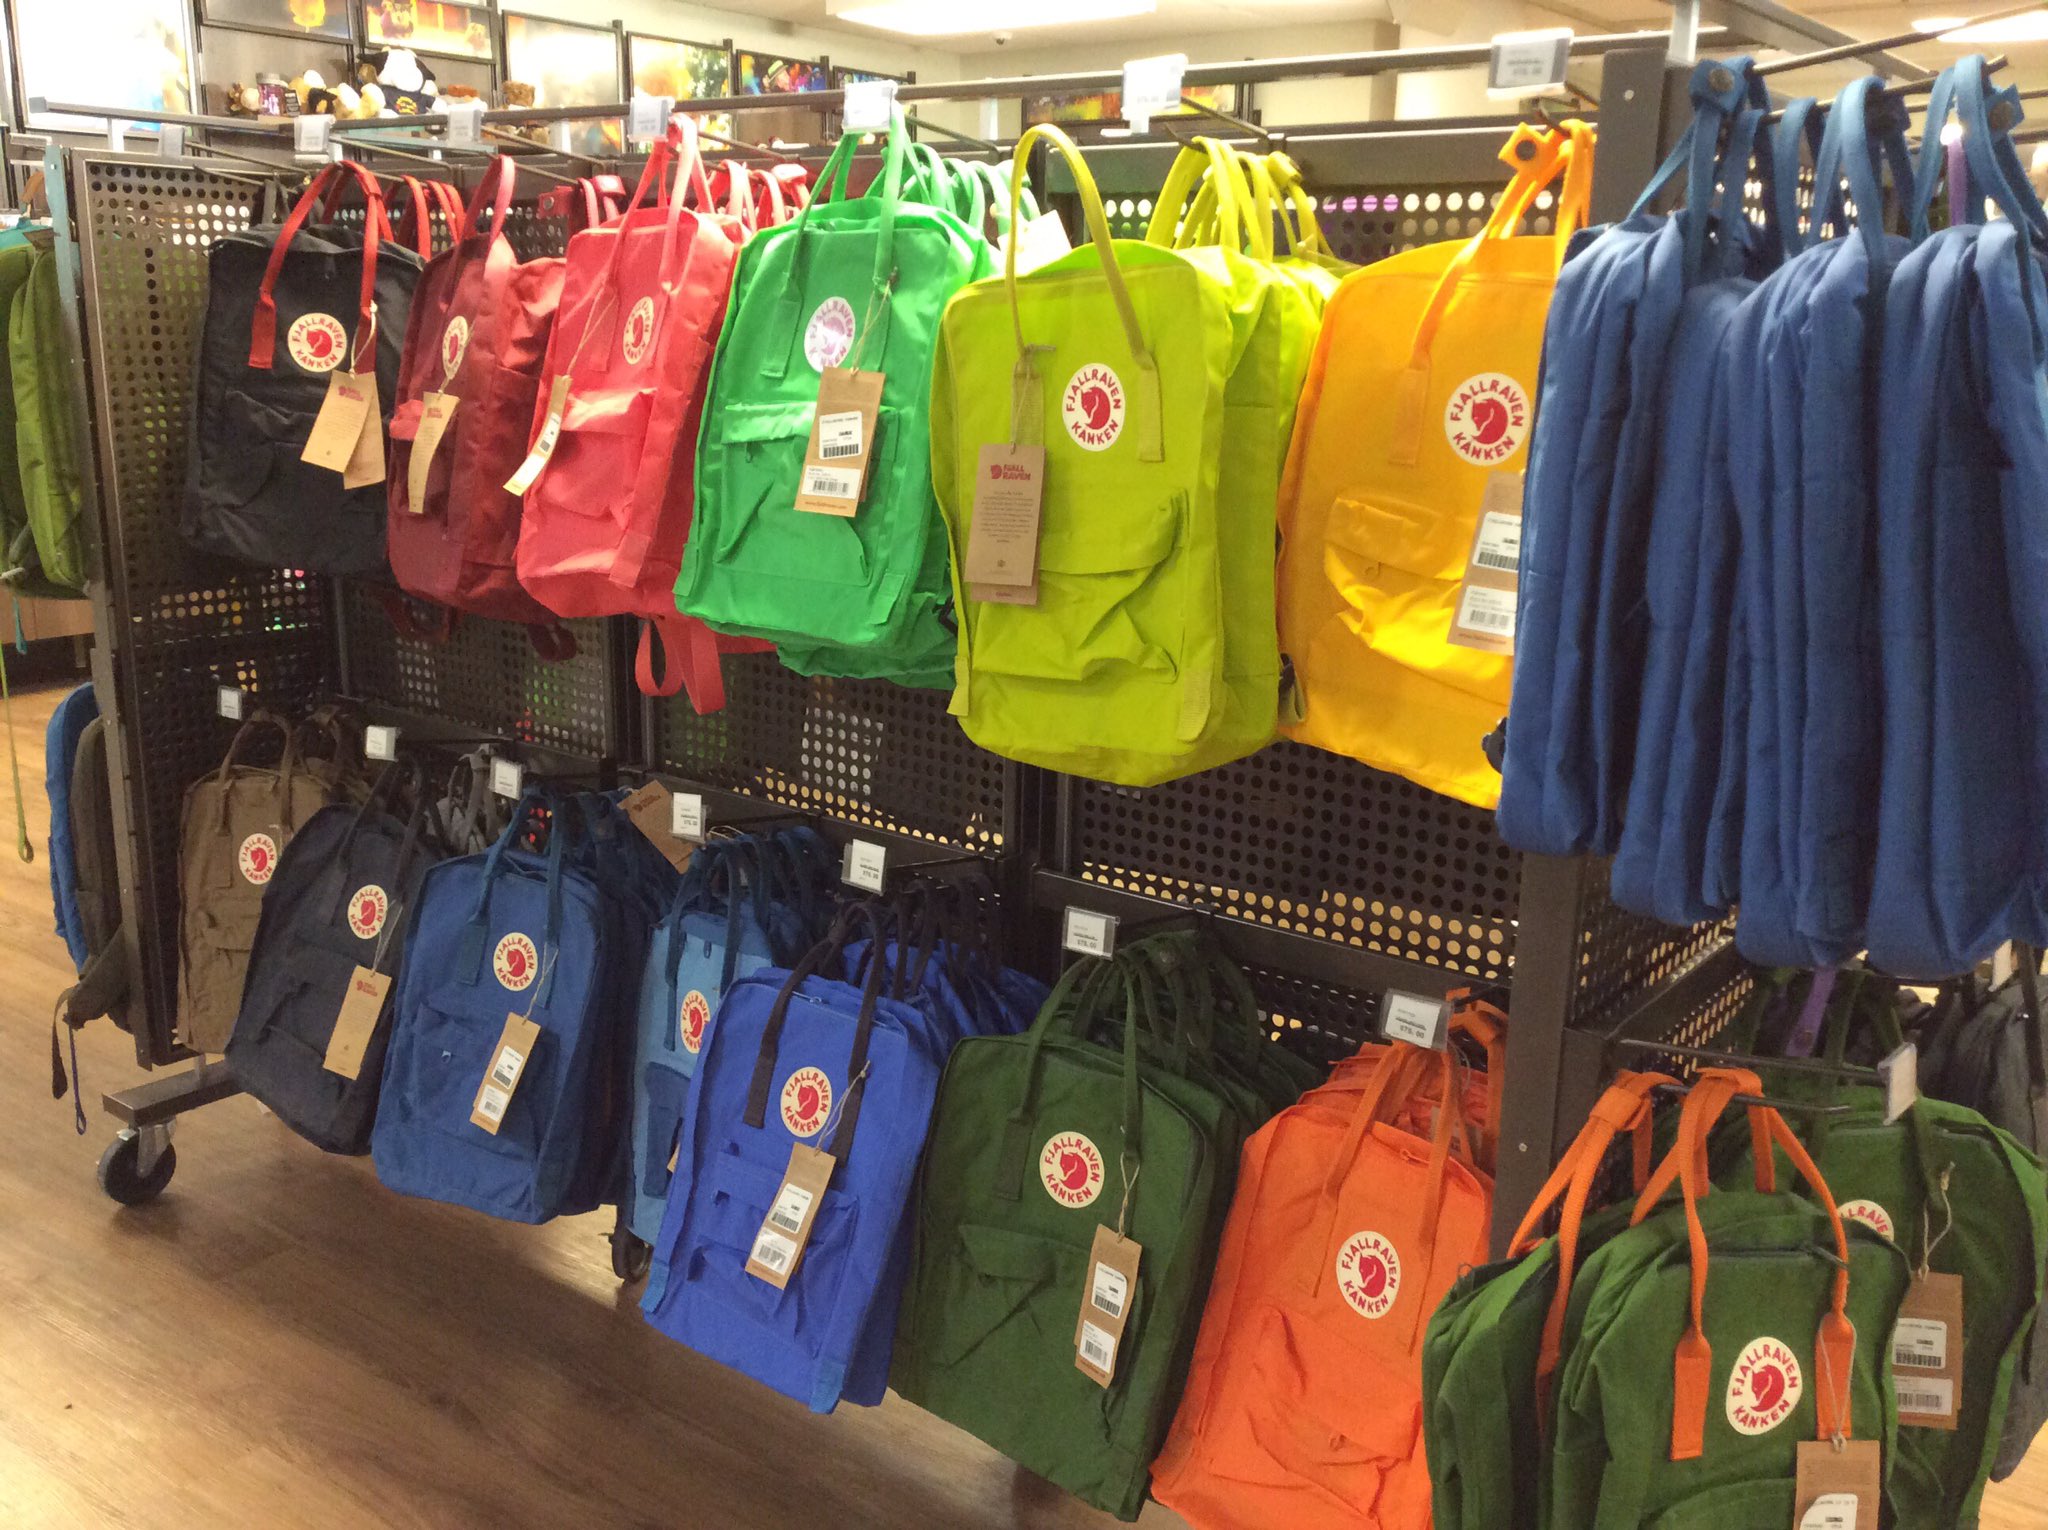 Stratford on Avon mate Vuilnisbak UC Davis Stores on Twitter: "Fjallraven Kanken backpacks are at 25% off  today to customers who present their One Day Sale postcard!  https://t.co/qAJe2YCdRT" / Twitter